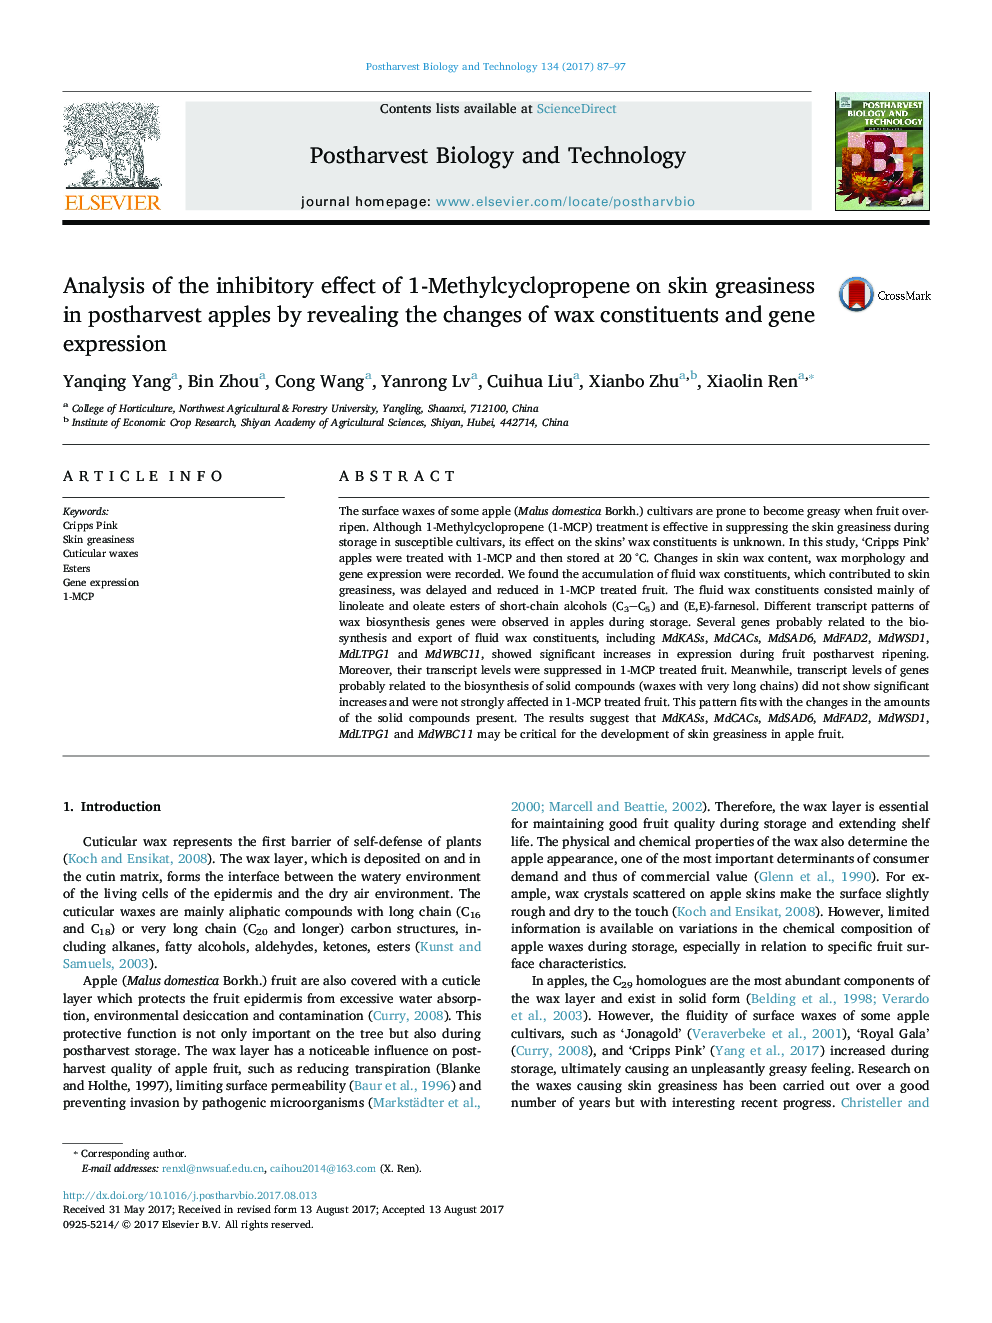 Analysis of the inhibitory effect of 1-Methylcyclopropene on skin greasiness in postharvest apples by revealing the changes of wax constituents and gene expression